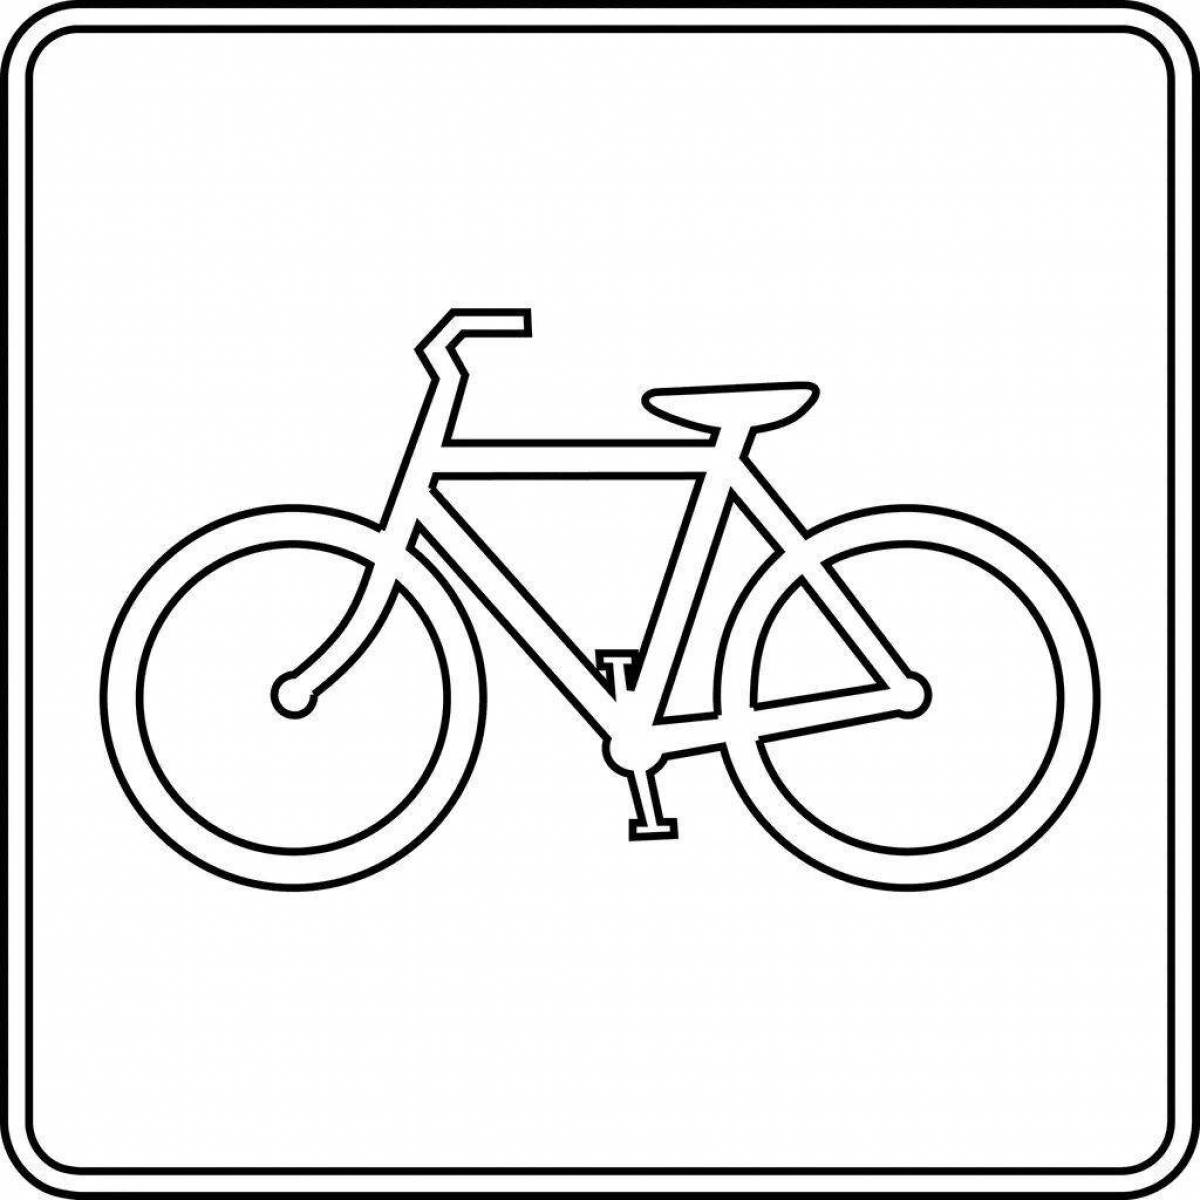 Coloring page road sign bold bike path